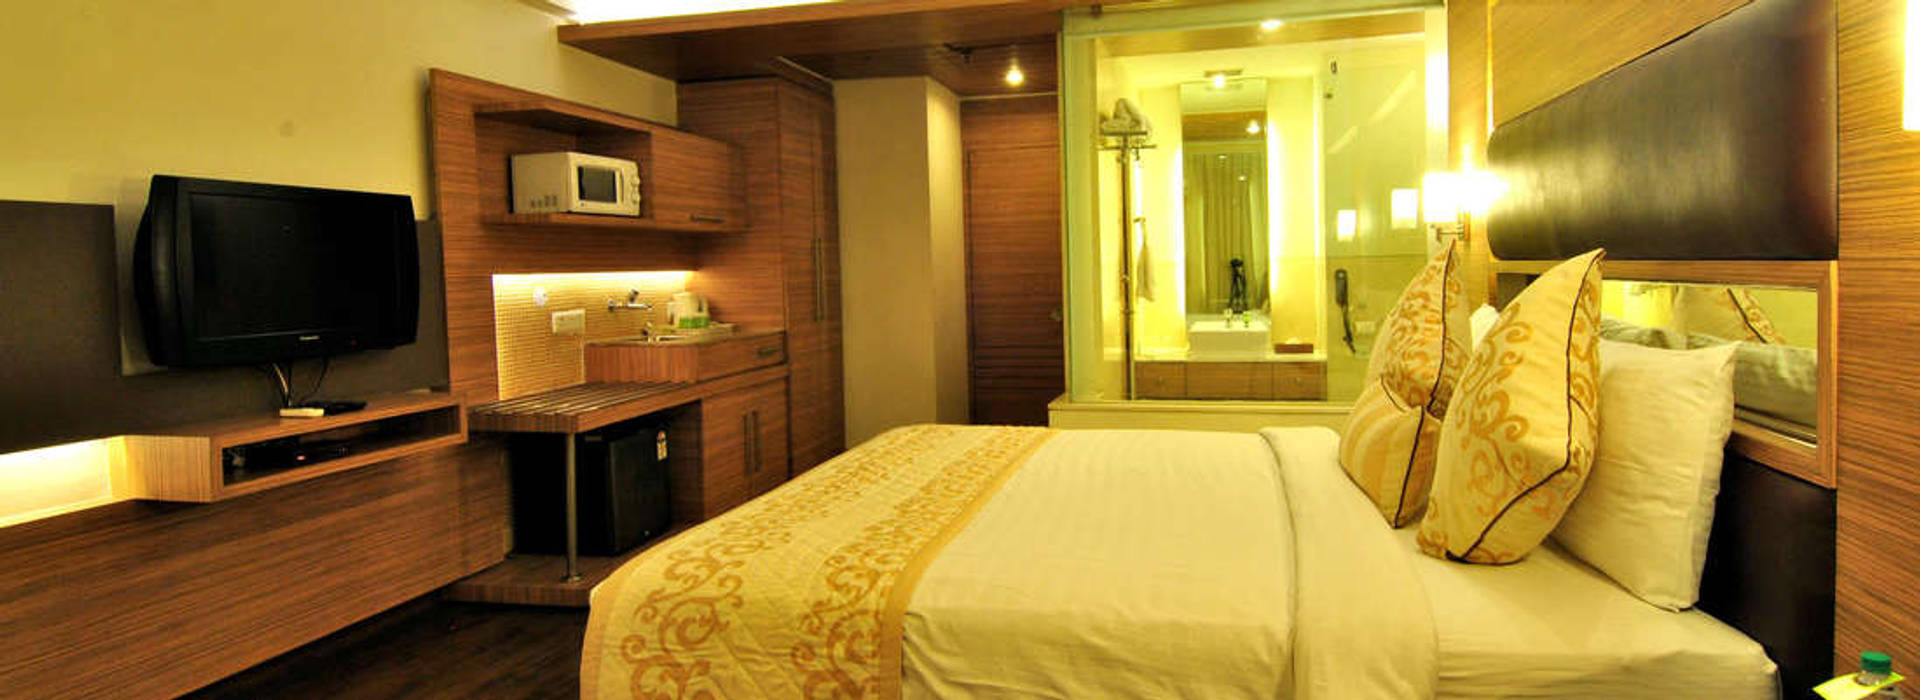 BEDROOM Evershine construction Commercial spaces Hotels